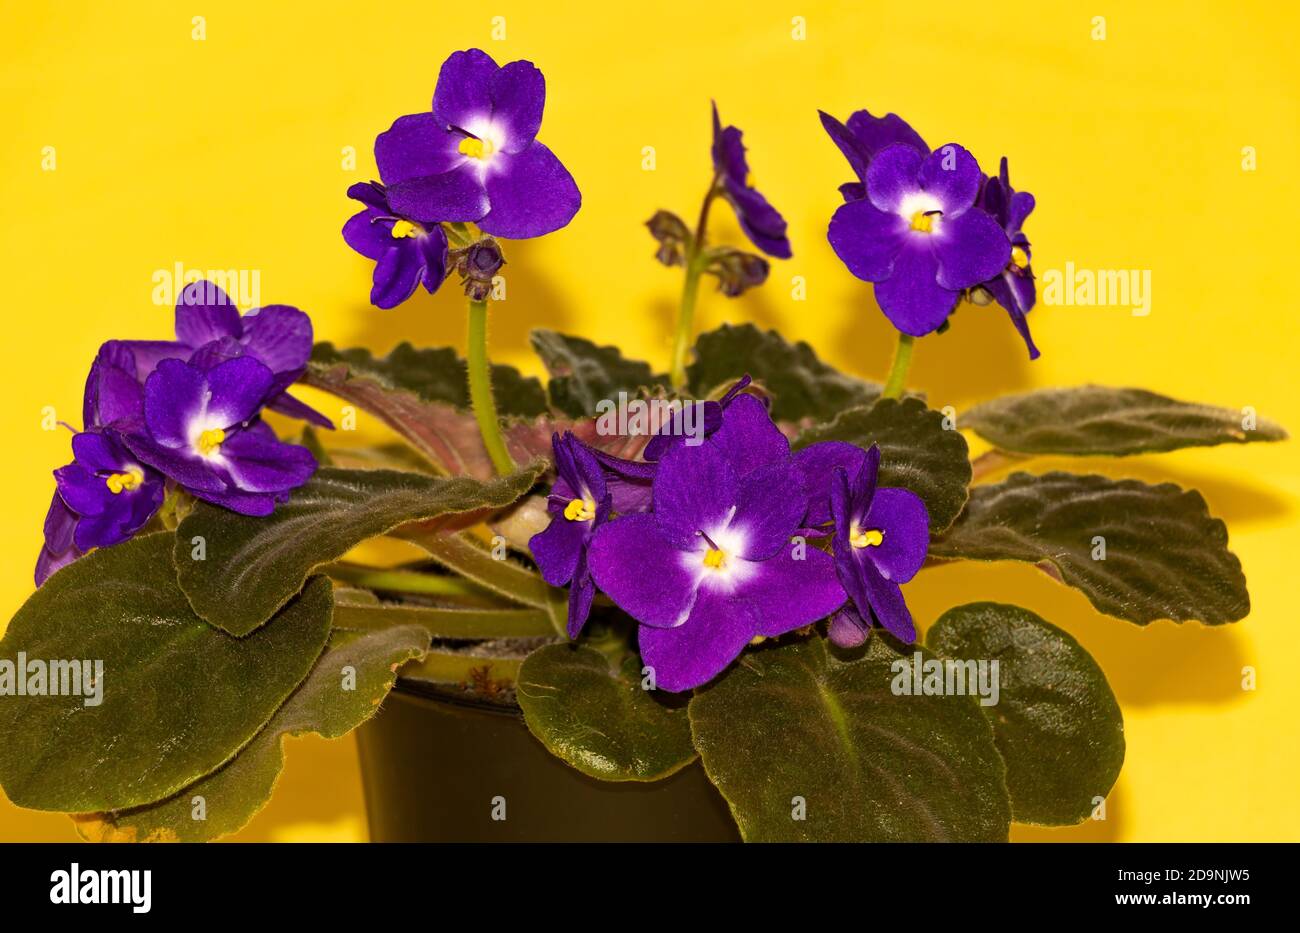 African violet with beautiful purple flowers. How to grow african violets Concept. Yellow background Stock Photo